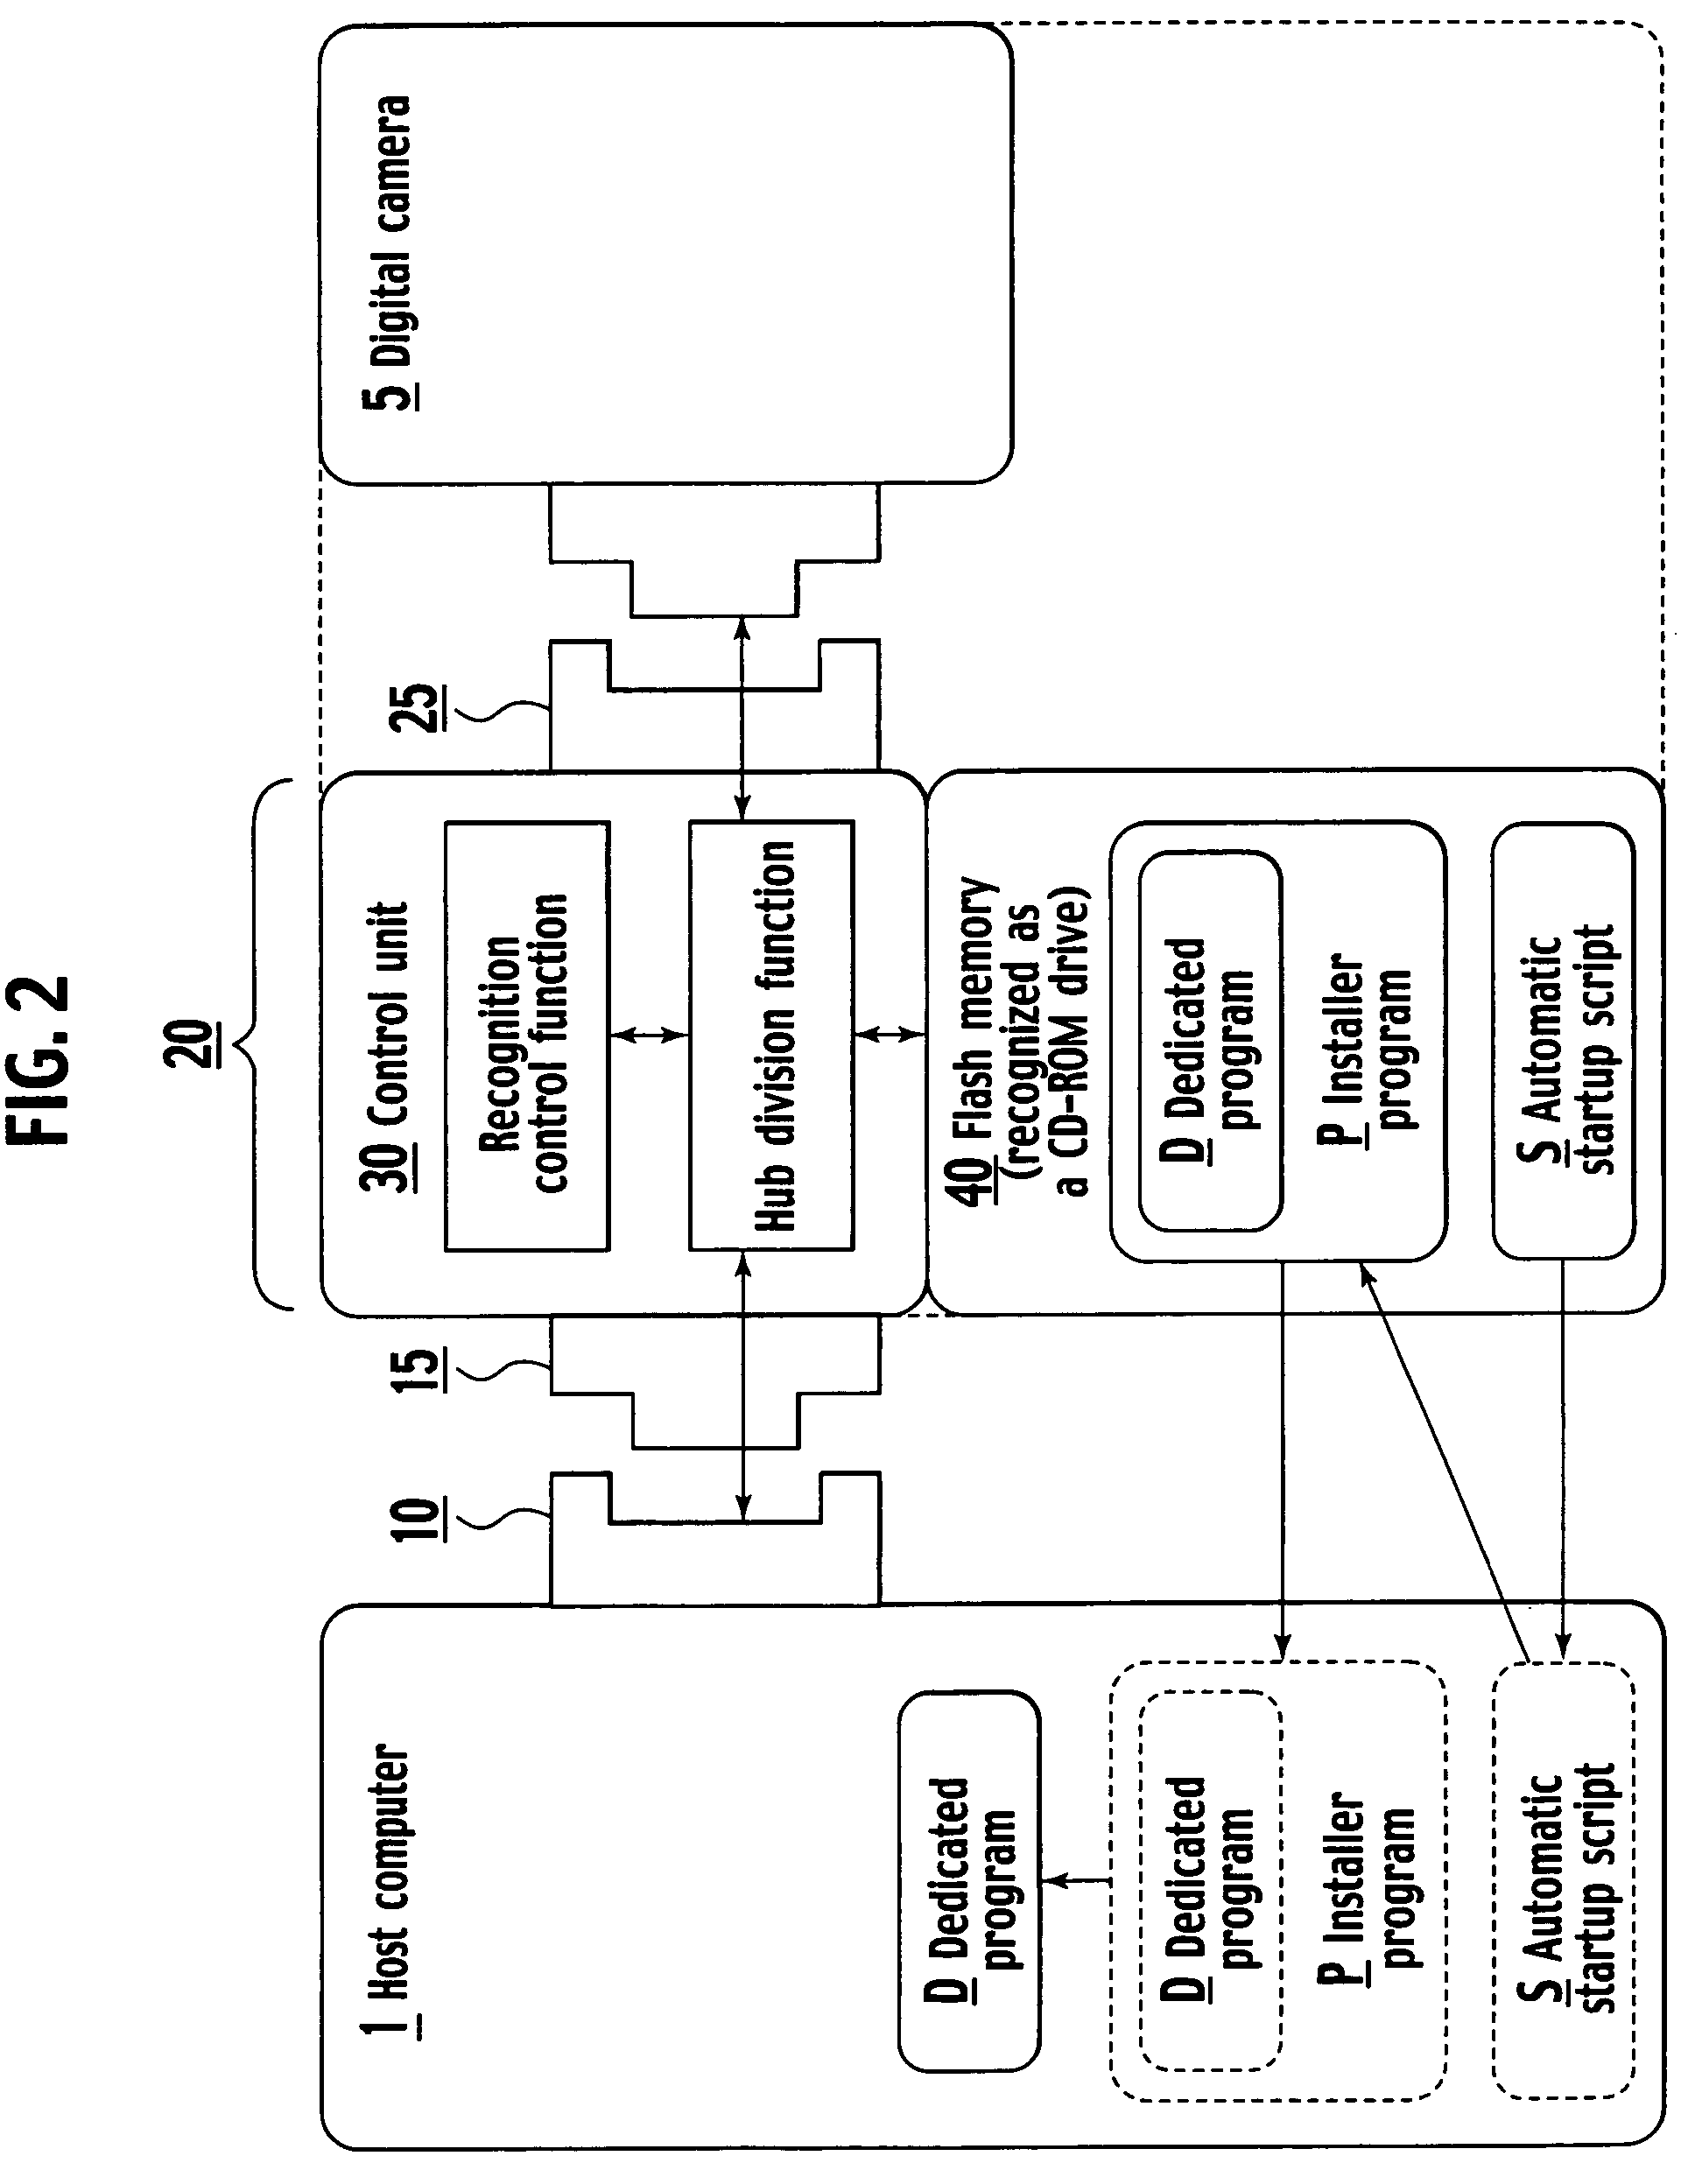 Removable device and control circuit for allowing a medium insertion